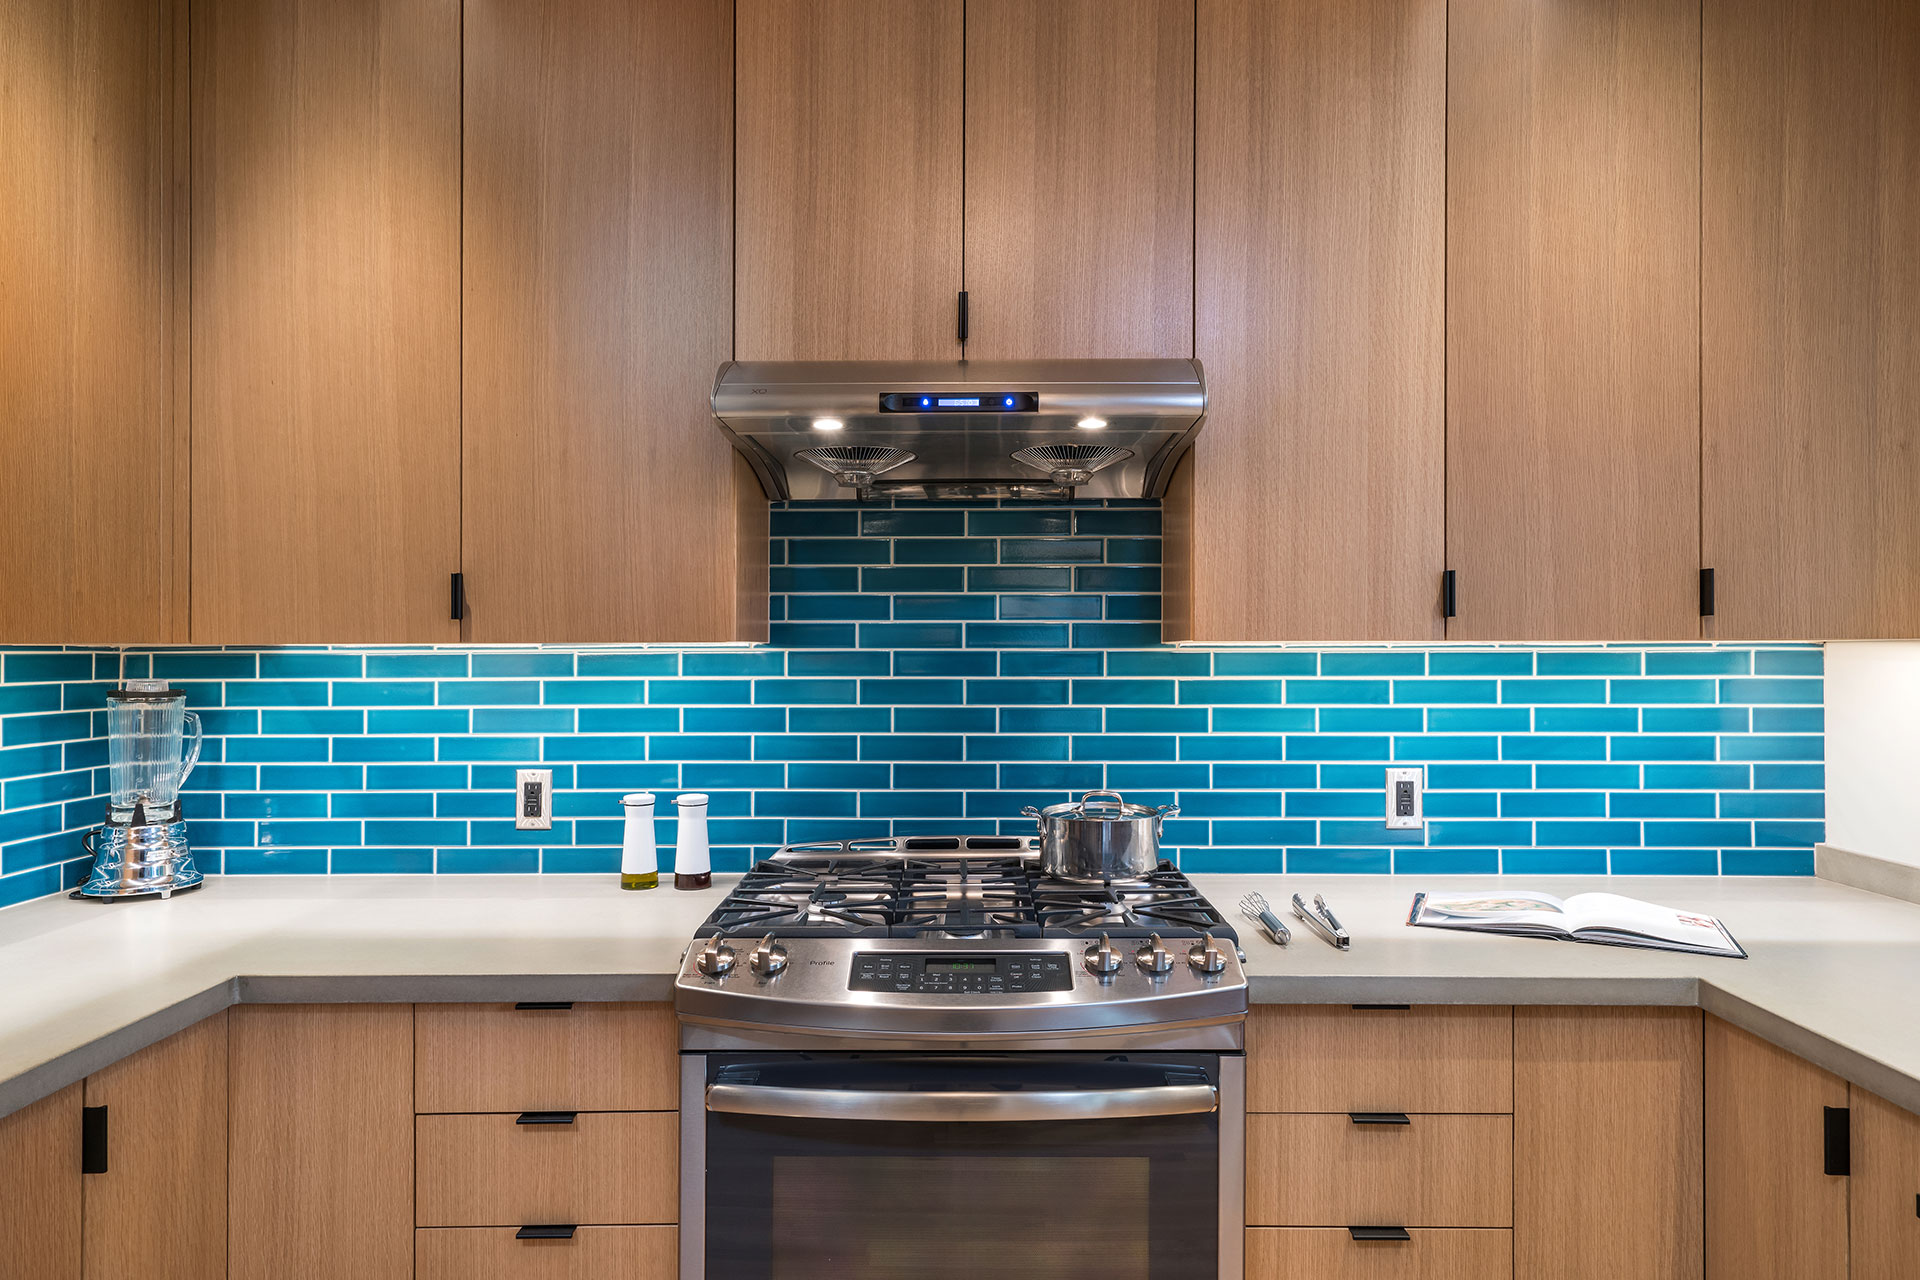 The focal point of the kitchen after the whole house renovation is the bright blue backsplash with 2" x 8" tile from Fireclay Tile.